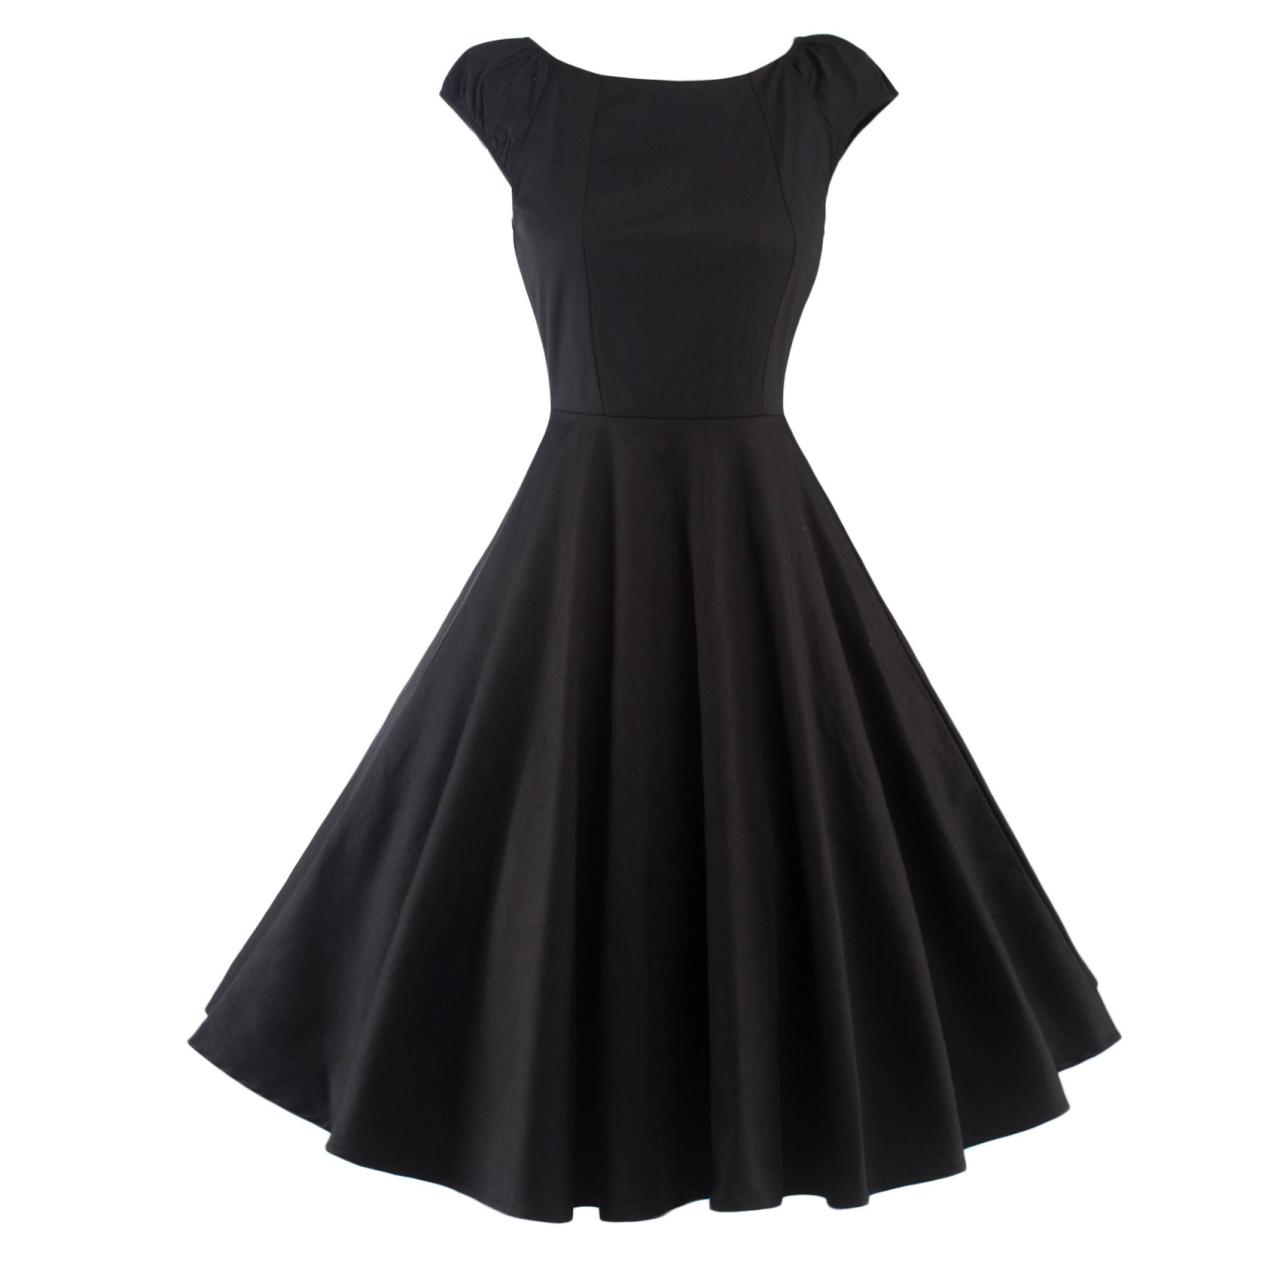 Women Summer Cotton Rockabilly Casual Holiday Party Dress